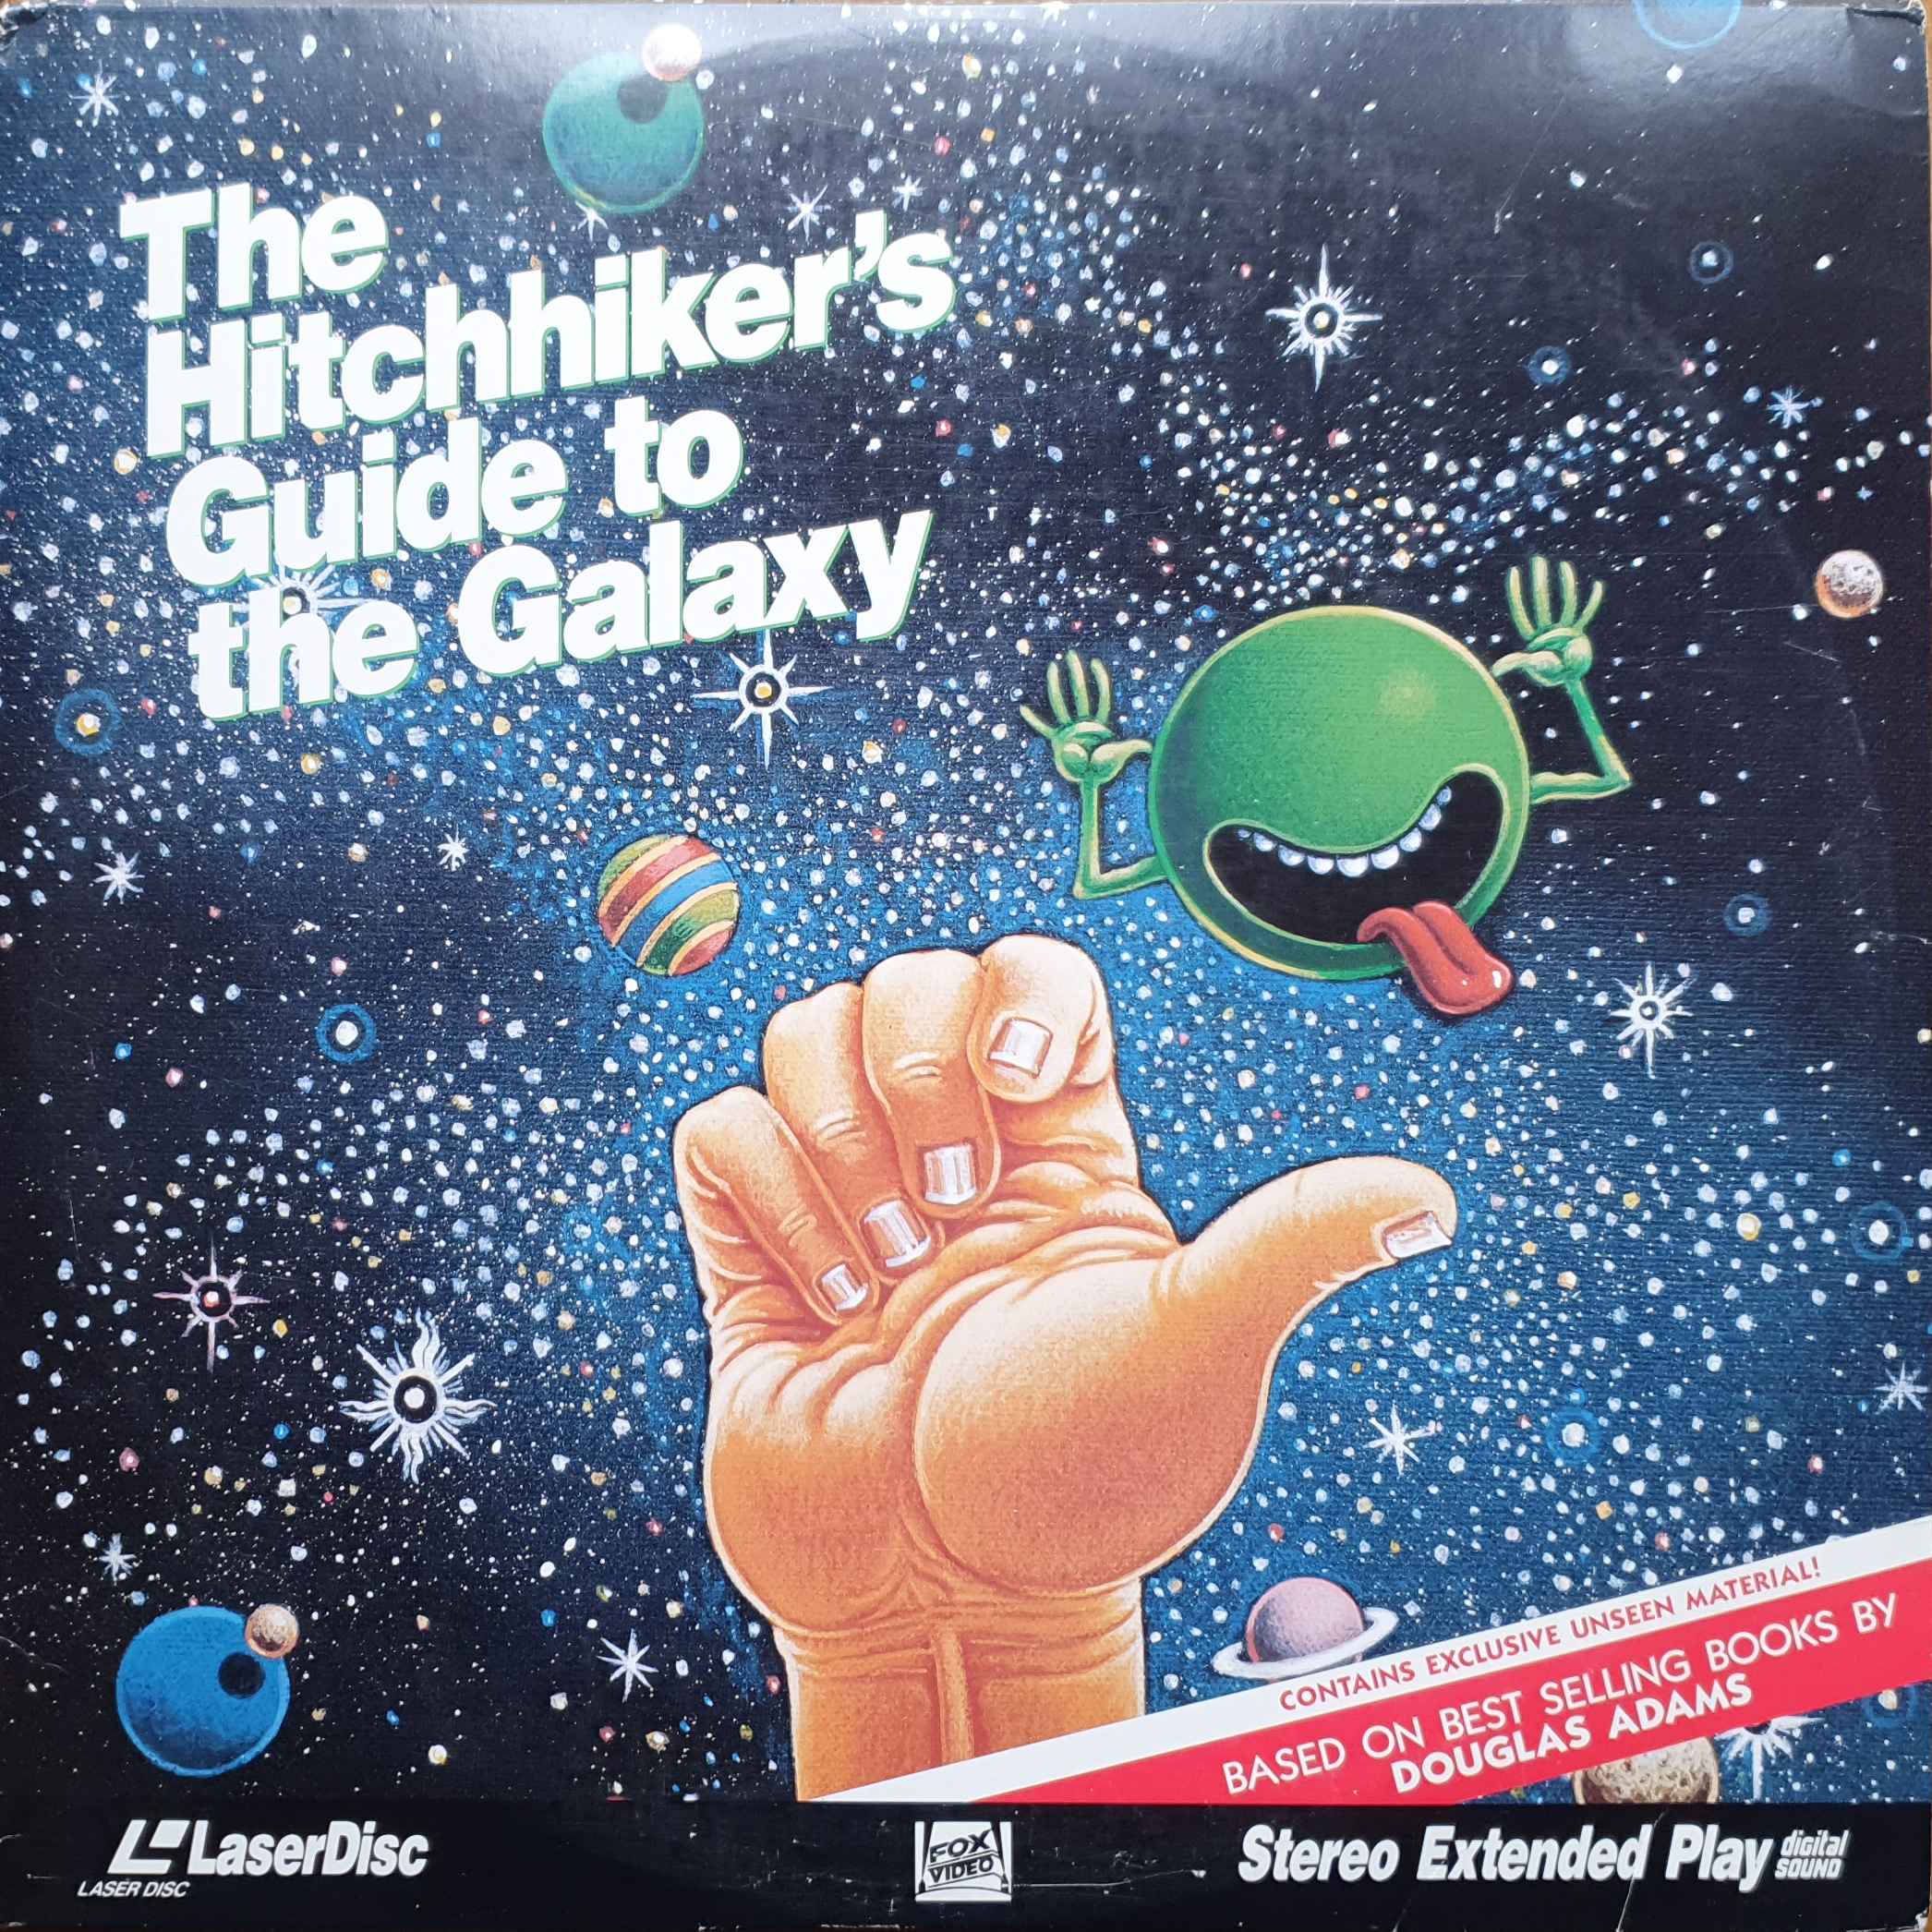 Picture of 5799 - 80 The hitchhiker's guide to the galaxy by artist Douglas Adams from the BBC anything_else - Records and Tapes library